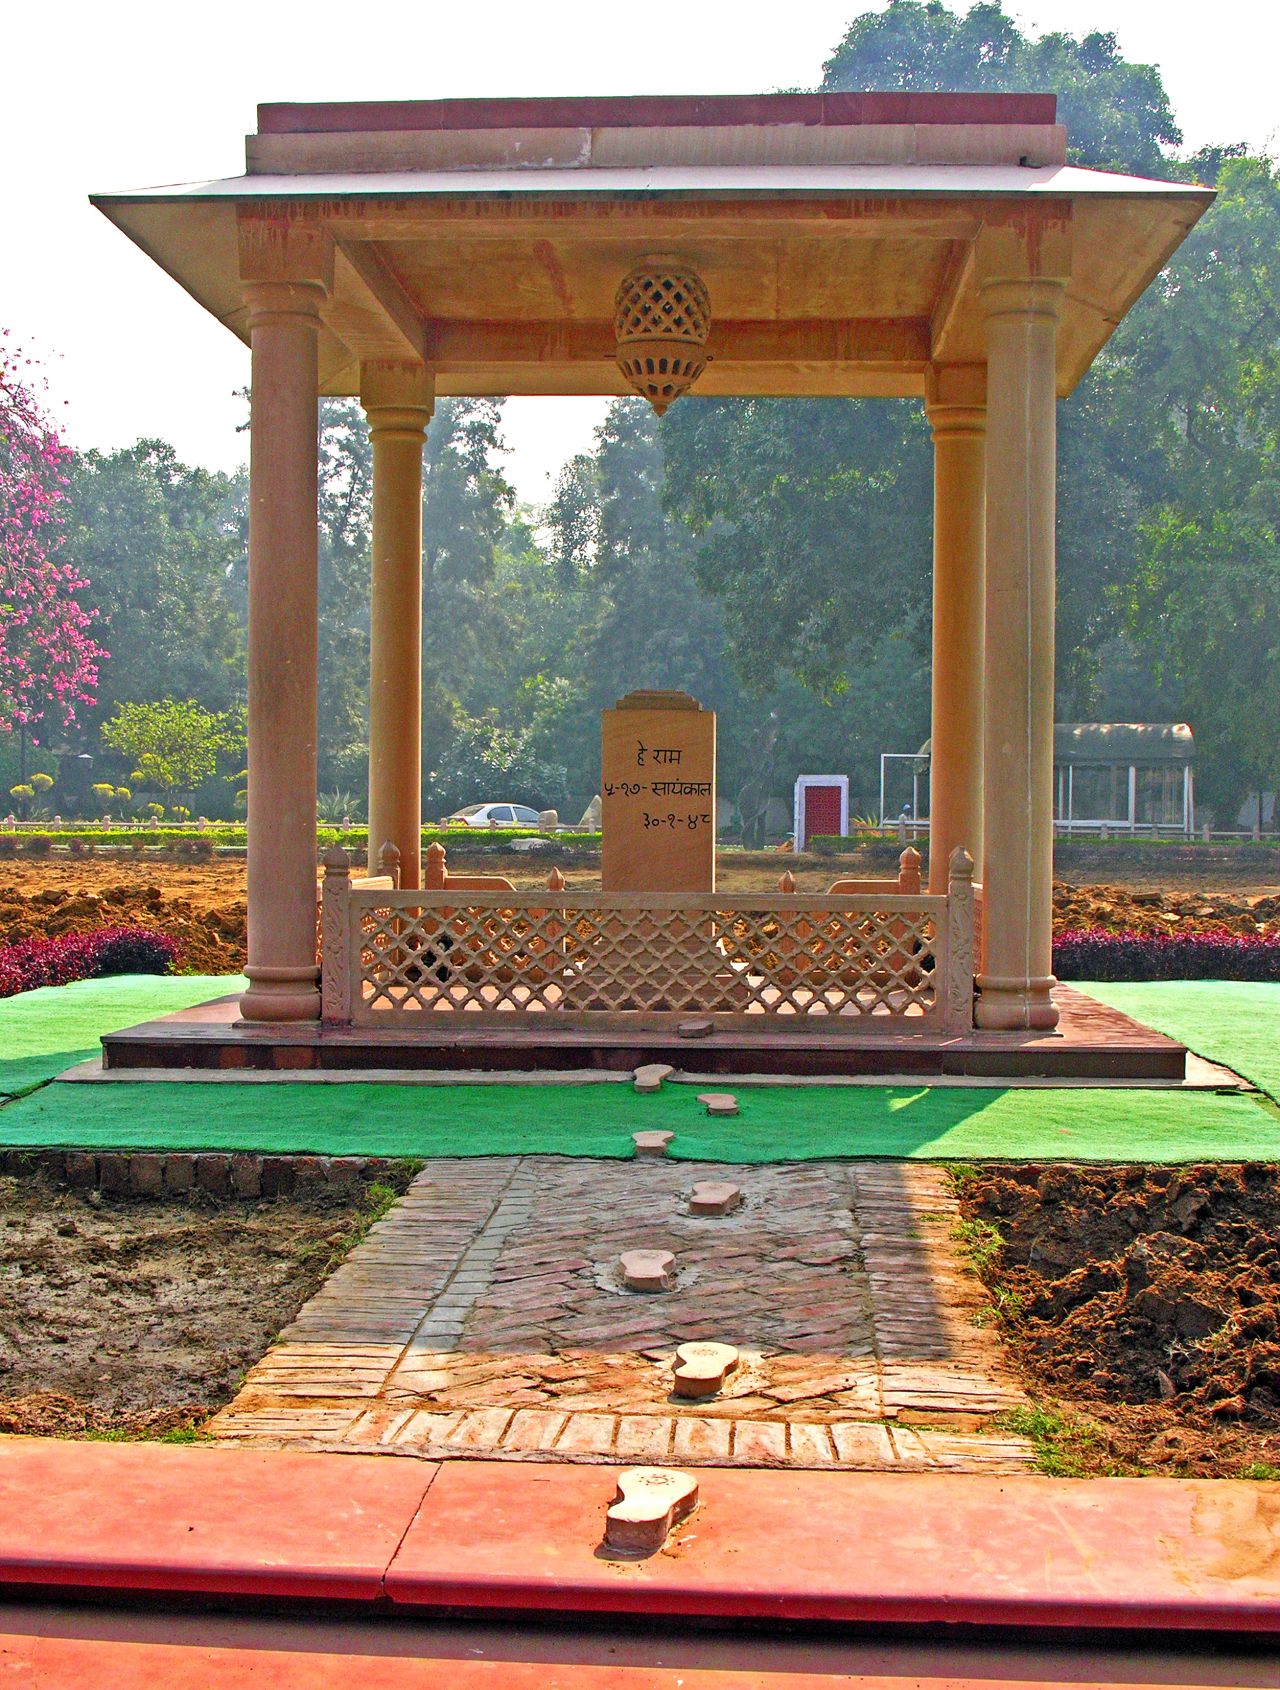 <strong>Birla House (New Delhi):</strong> Mahatma Ghandhi had left Birla House to lead a daily prayer meeting when he was shot in the chest at close range. The government bought the property and renamed it Gandhi Smriti, a memorial and museum dedicated to the life and teachings of Gandhi.